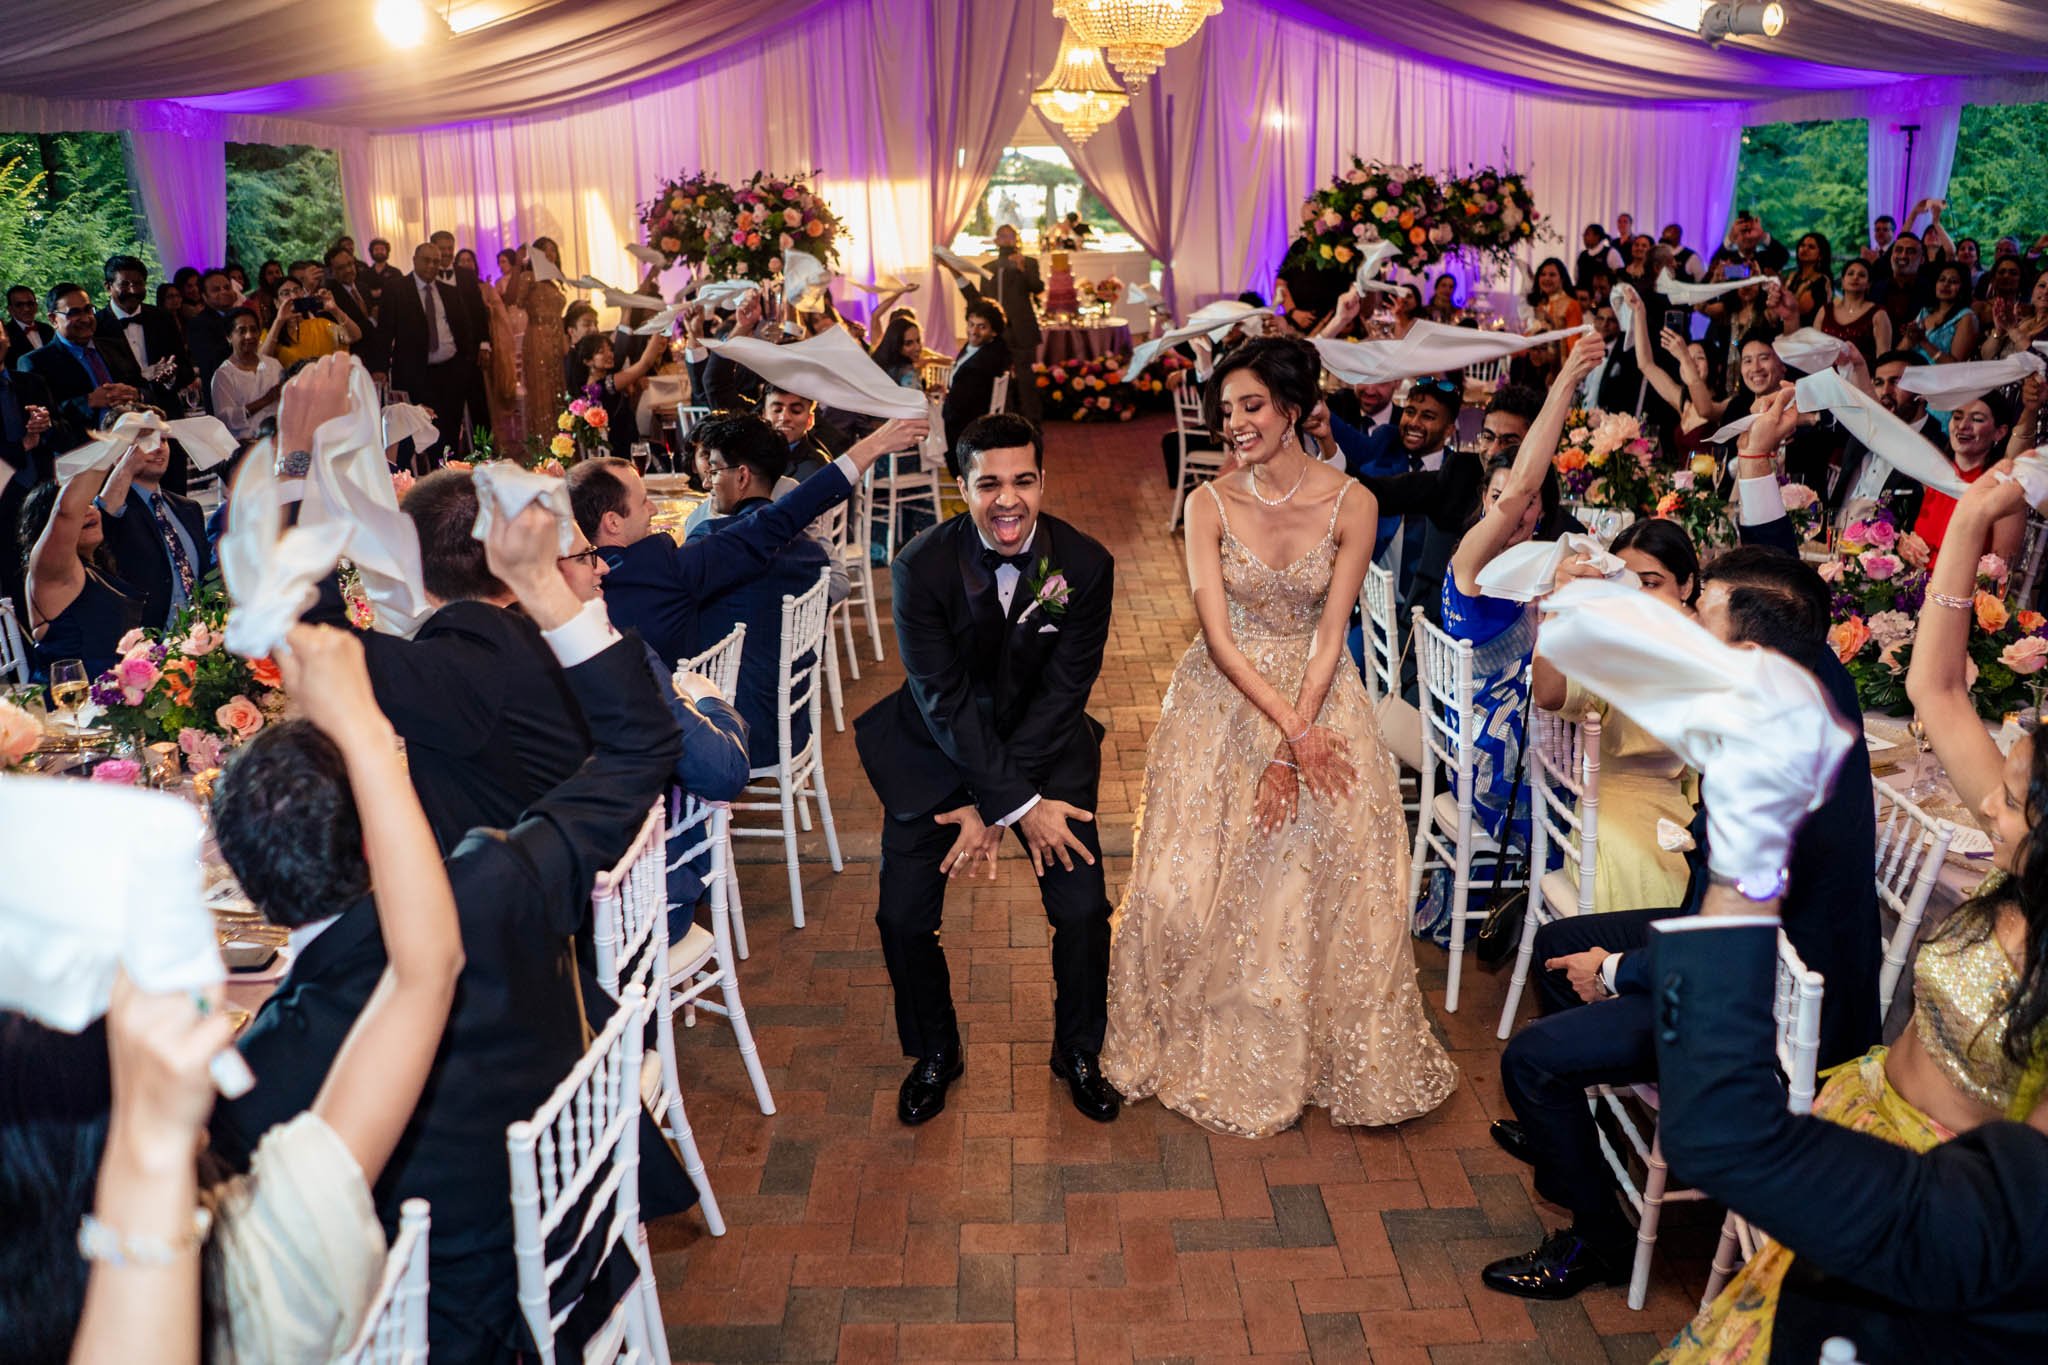 A bride and groom waving their hands in the air at a Biltmore Estate wedding reception.